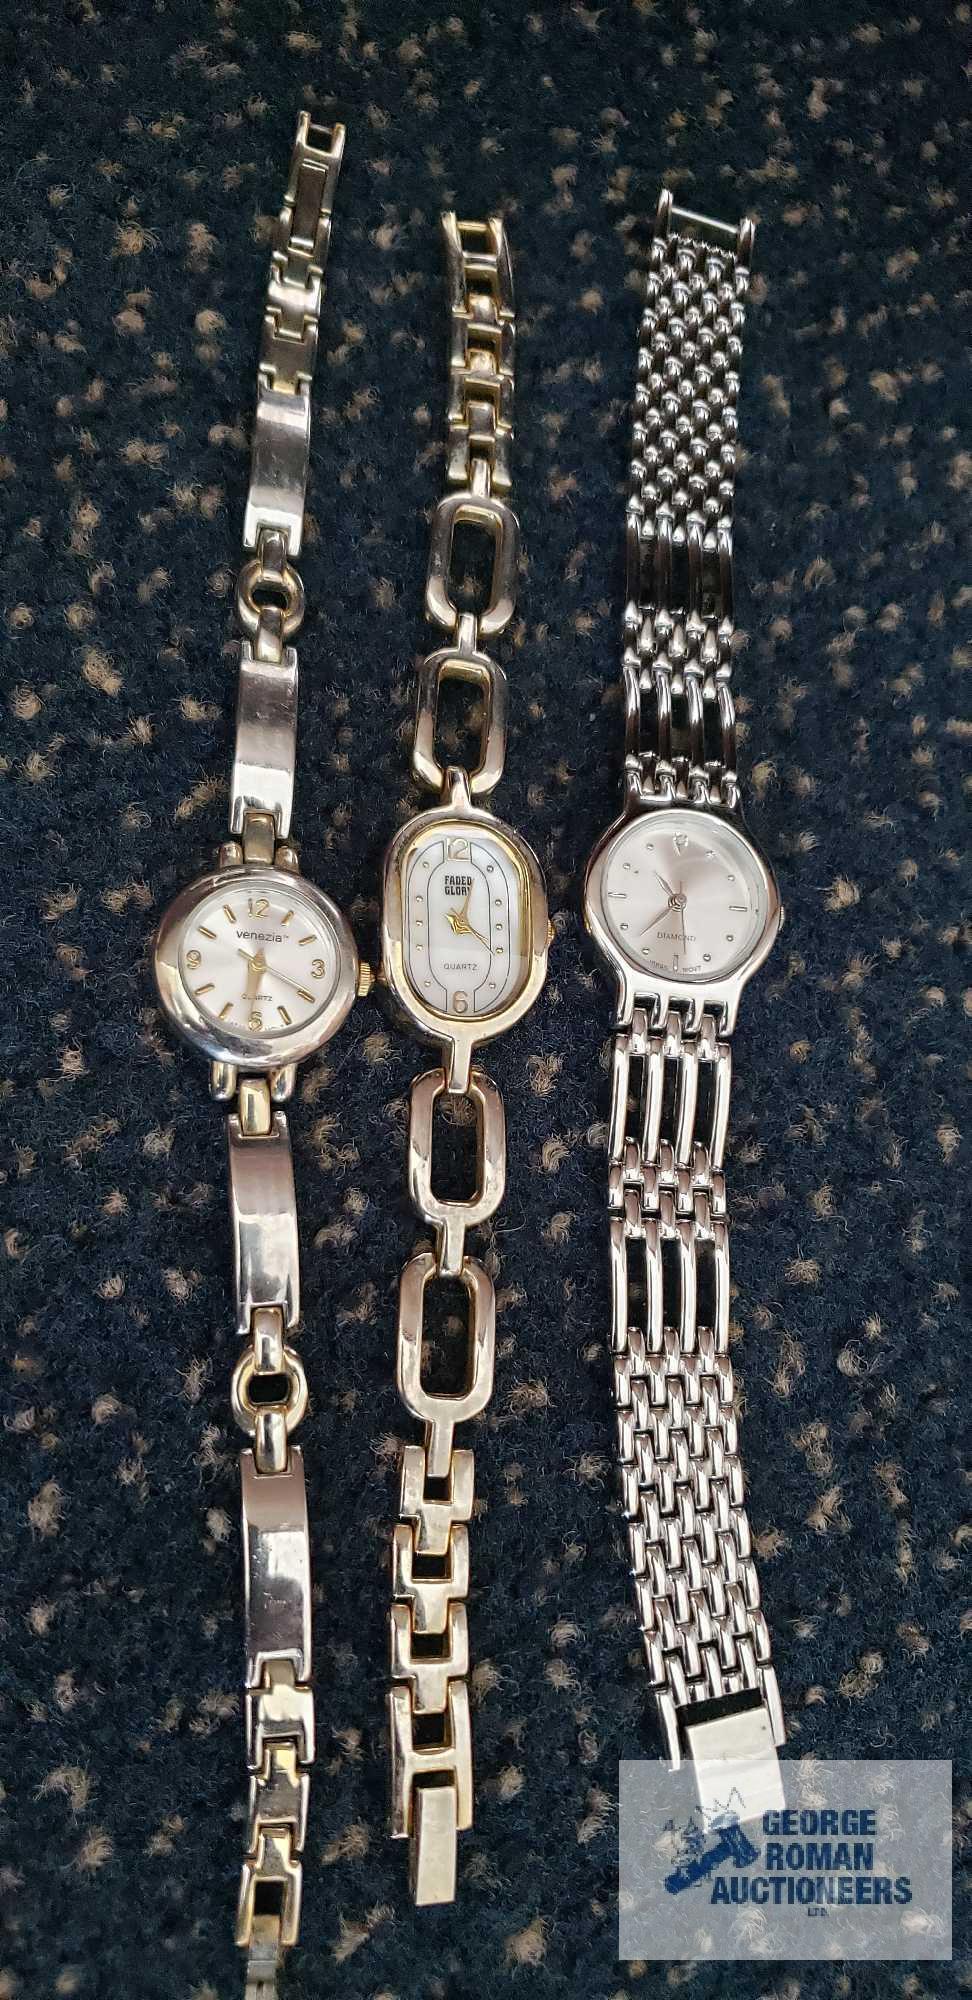 Five watches including Relic, Rumours, Venezia, Faded Glory, and Diamond